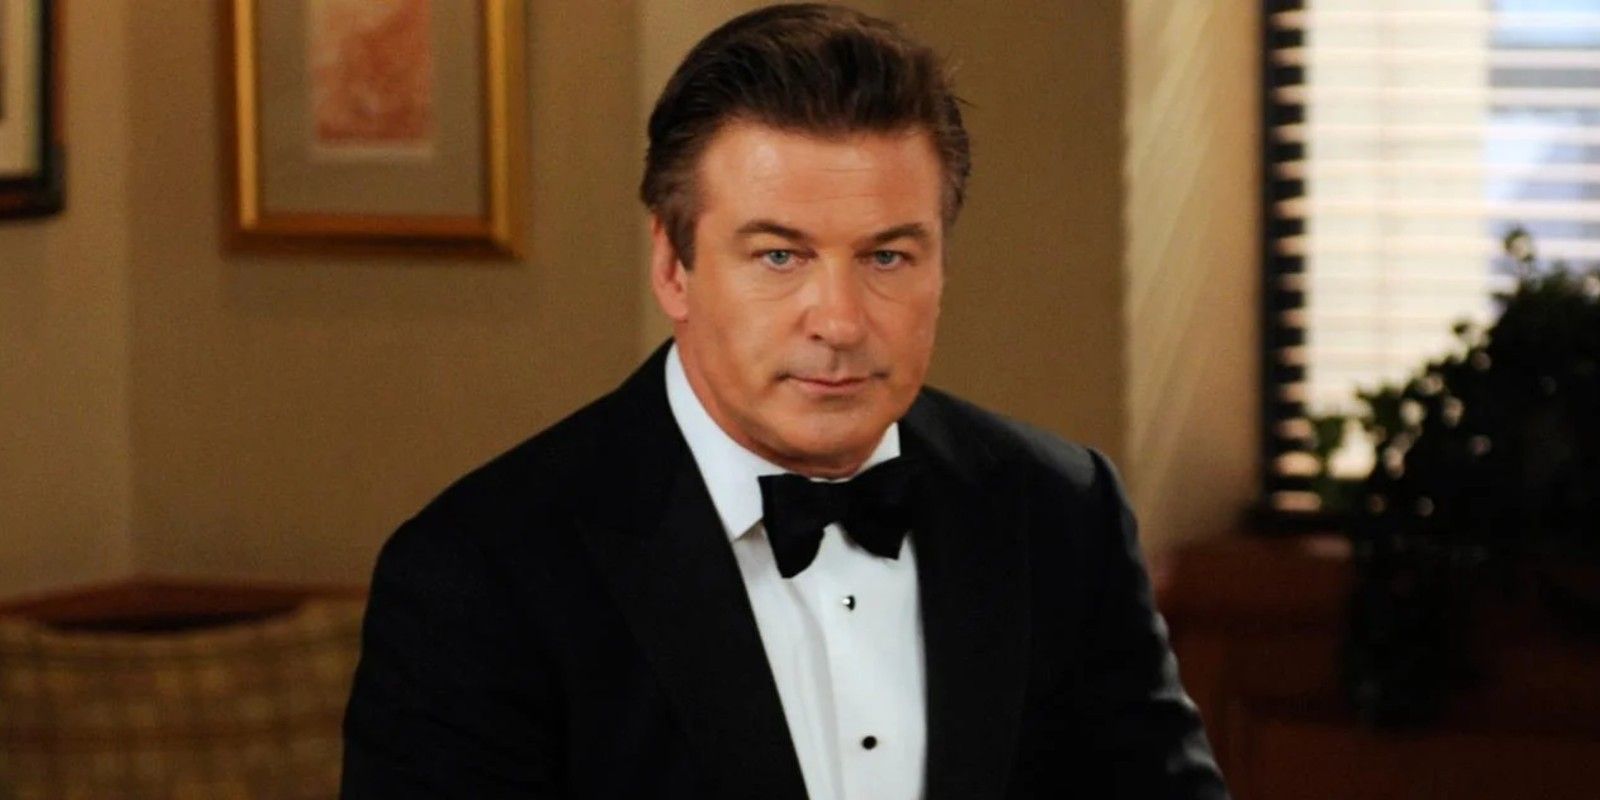 Jack Donaghy played by Alec Baldwin on 30 Rock